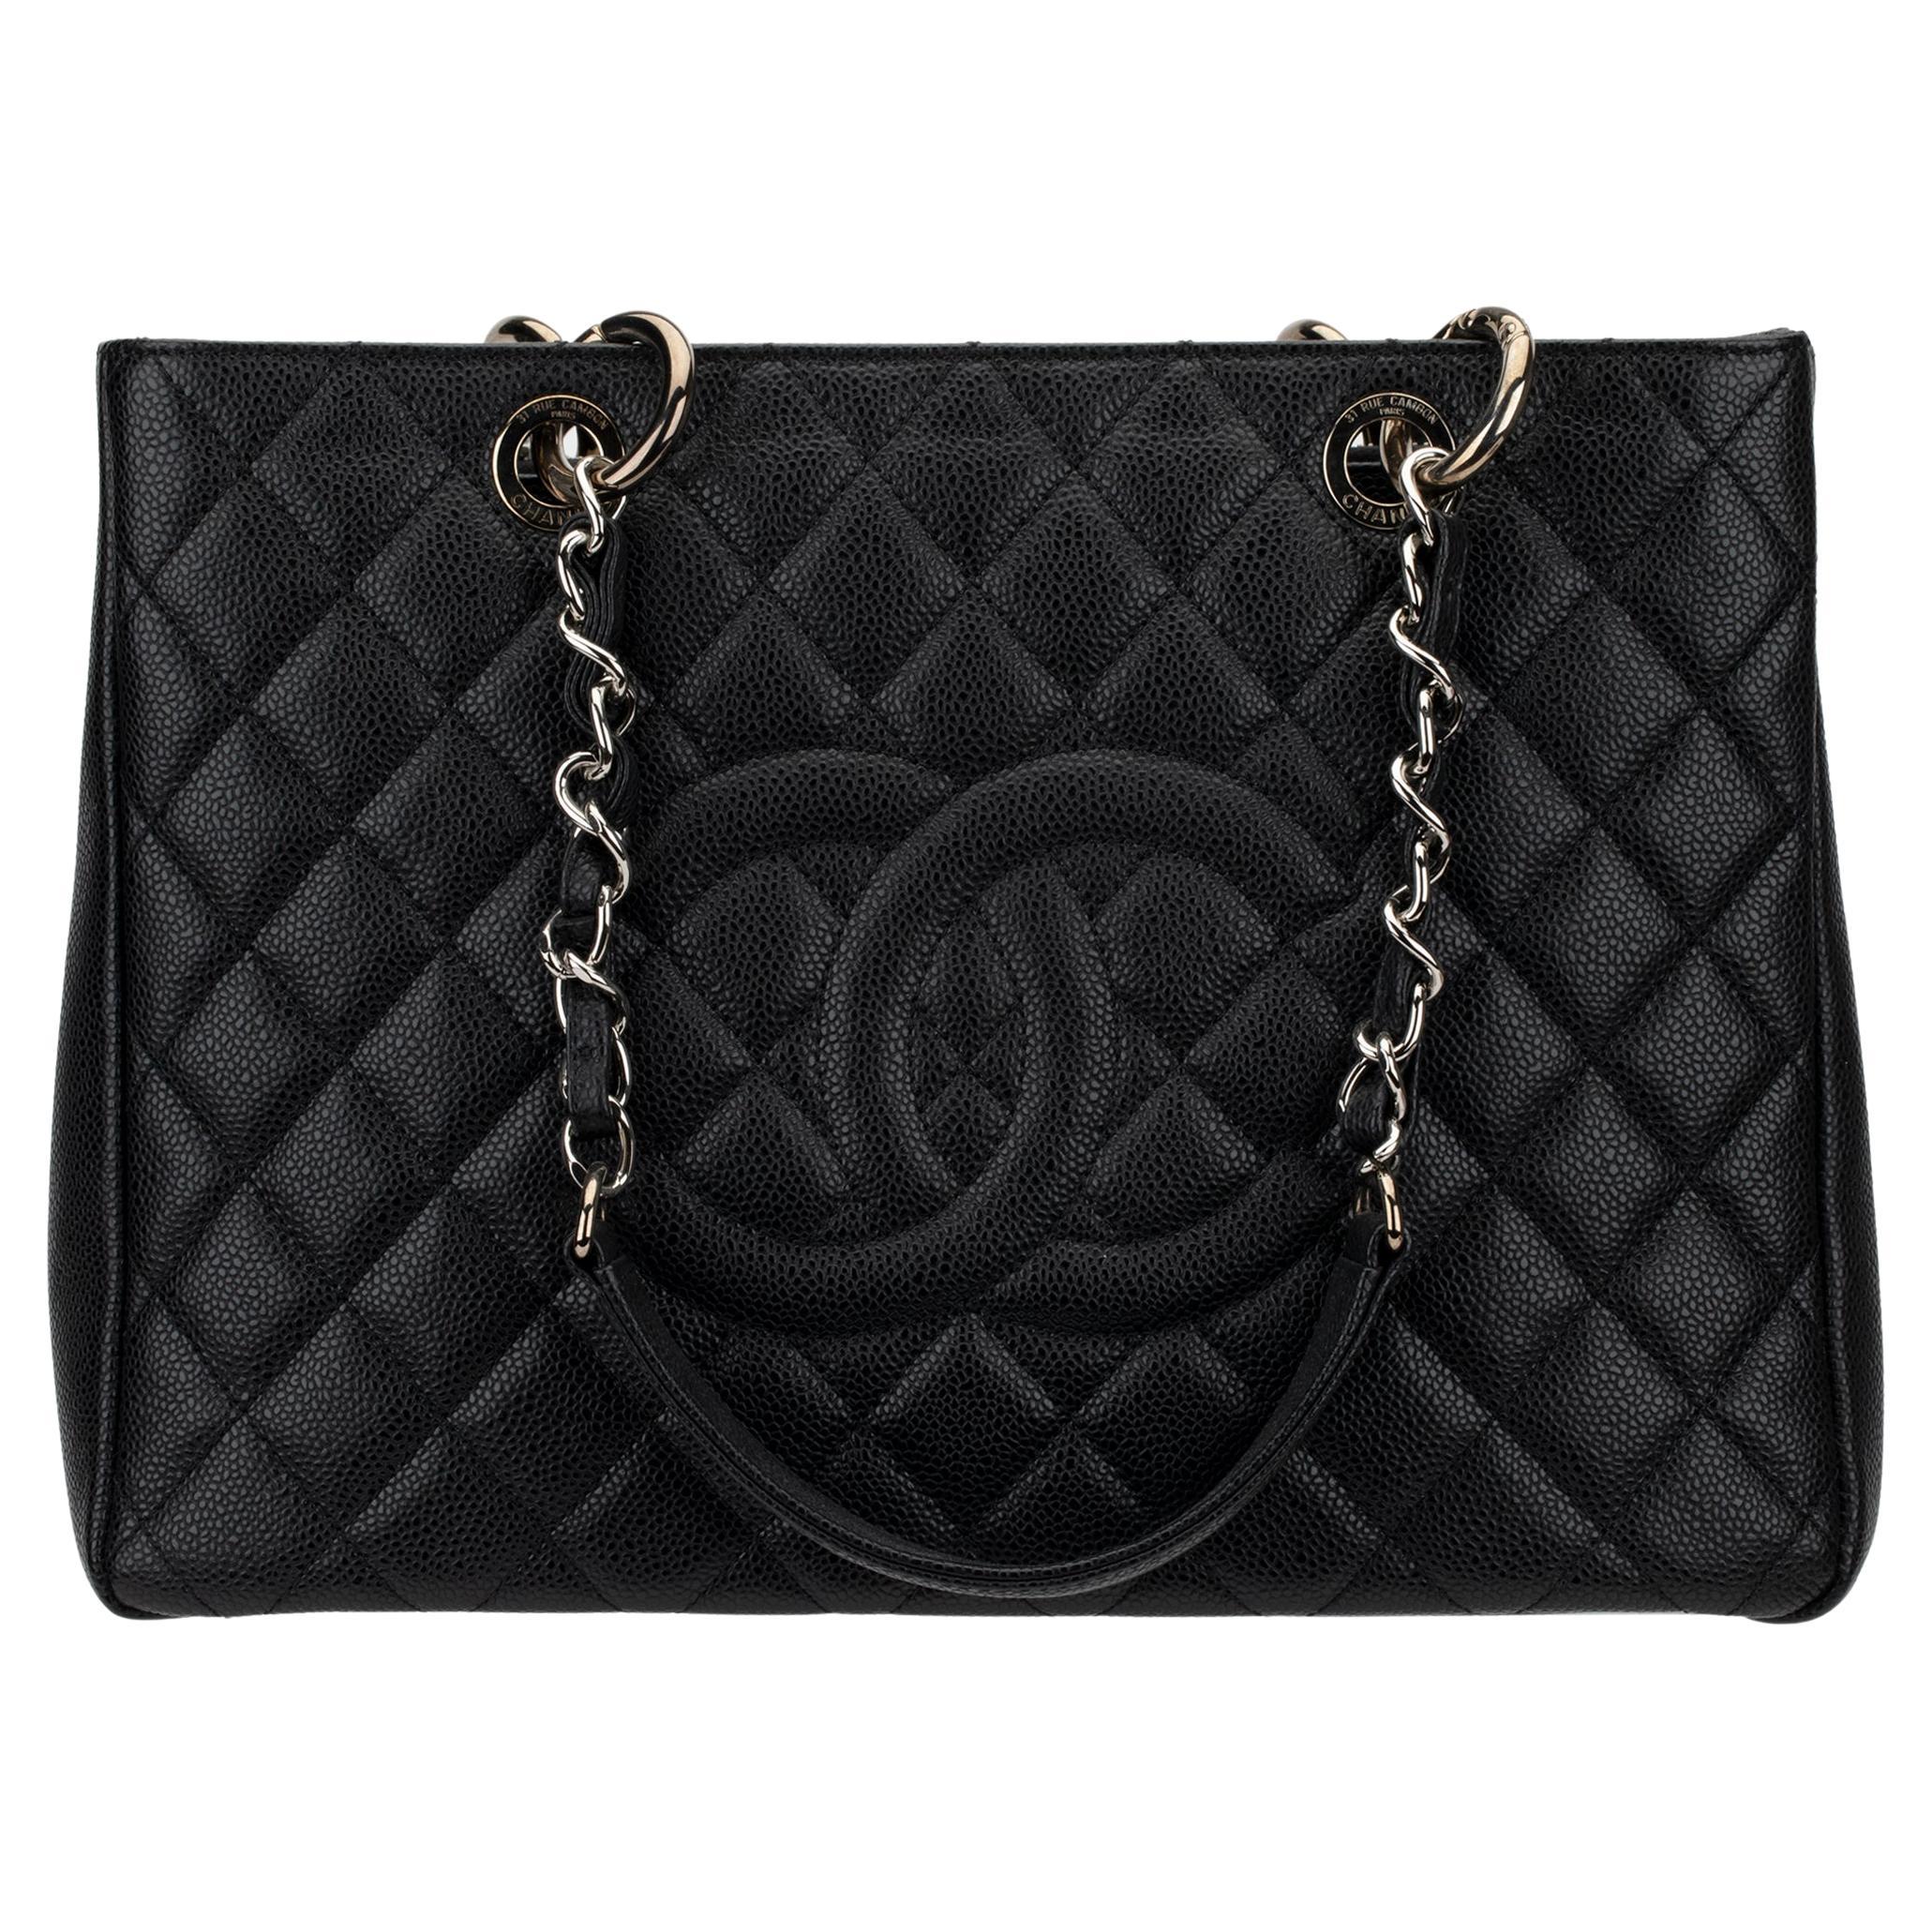 Chanel GST Black Quilted Caviar Leather Silver-Tone Hardware